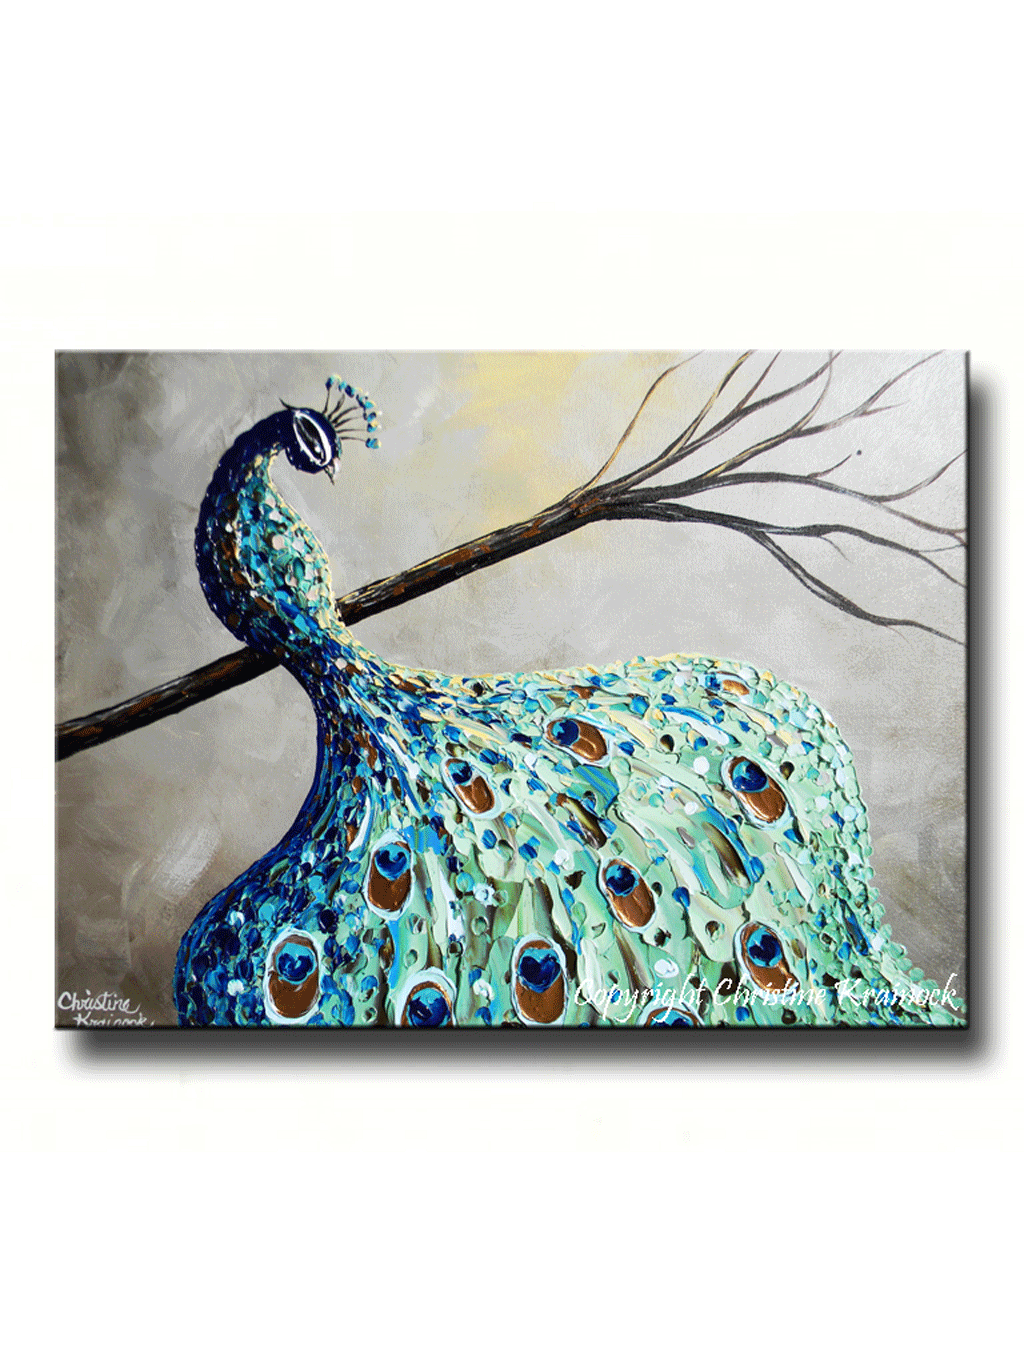 Load image into Gallery viewer, GICLEE PRINT Art Abstract Peacock Painting Modern Canvas Prints Blue Green Grey Brown Gold Bird - Christine Krainock Art - Contemporary Art by Christine - 1
